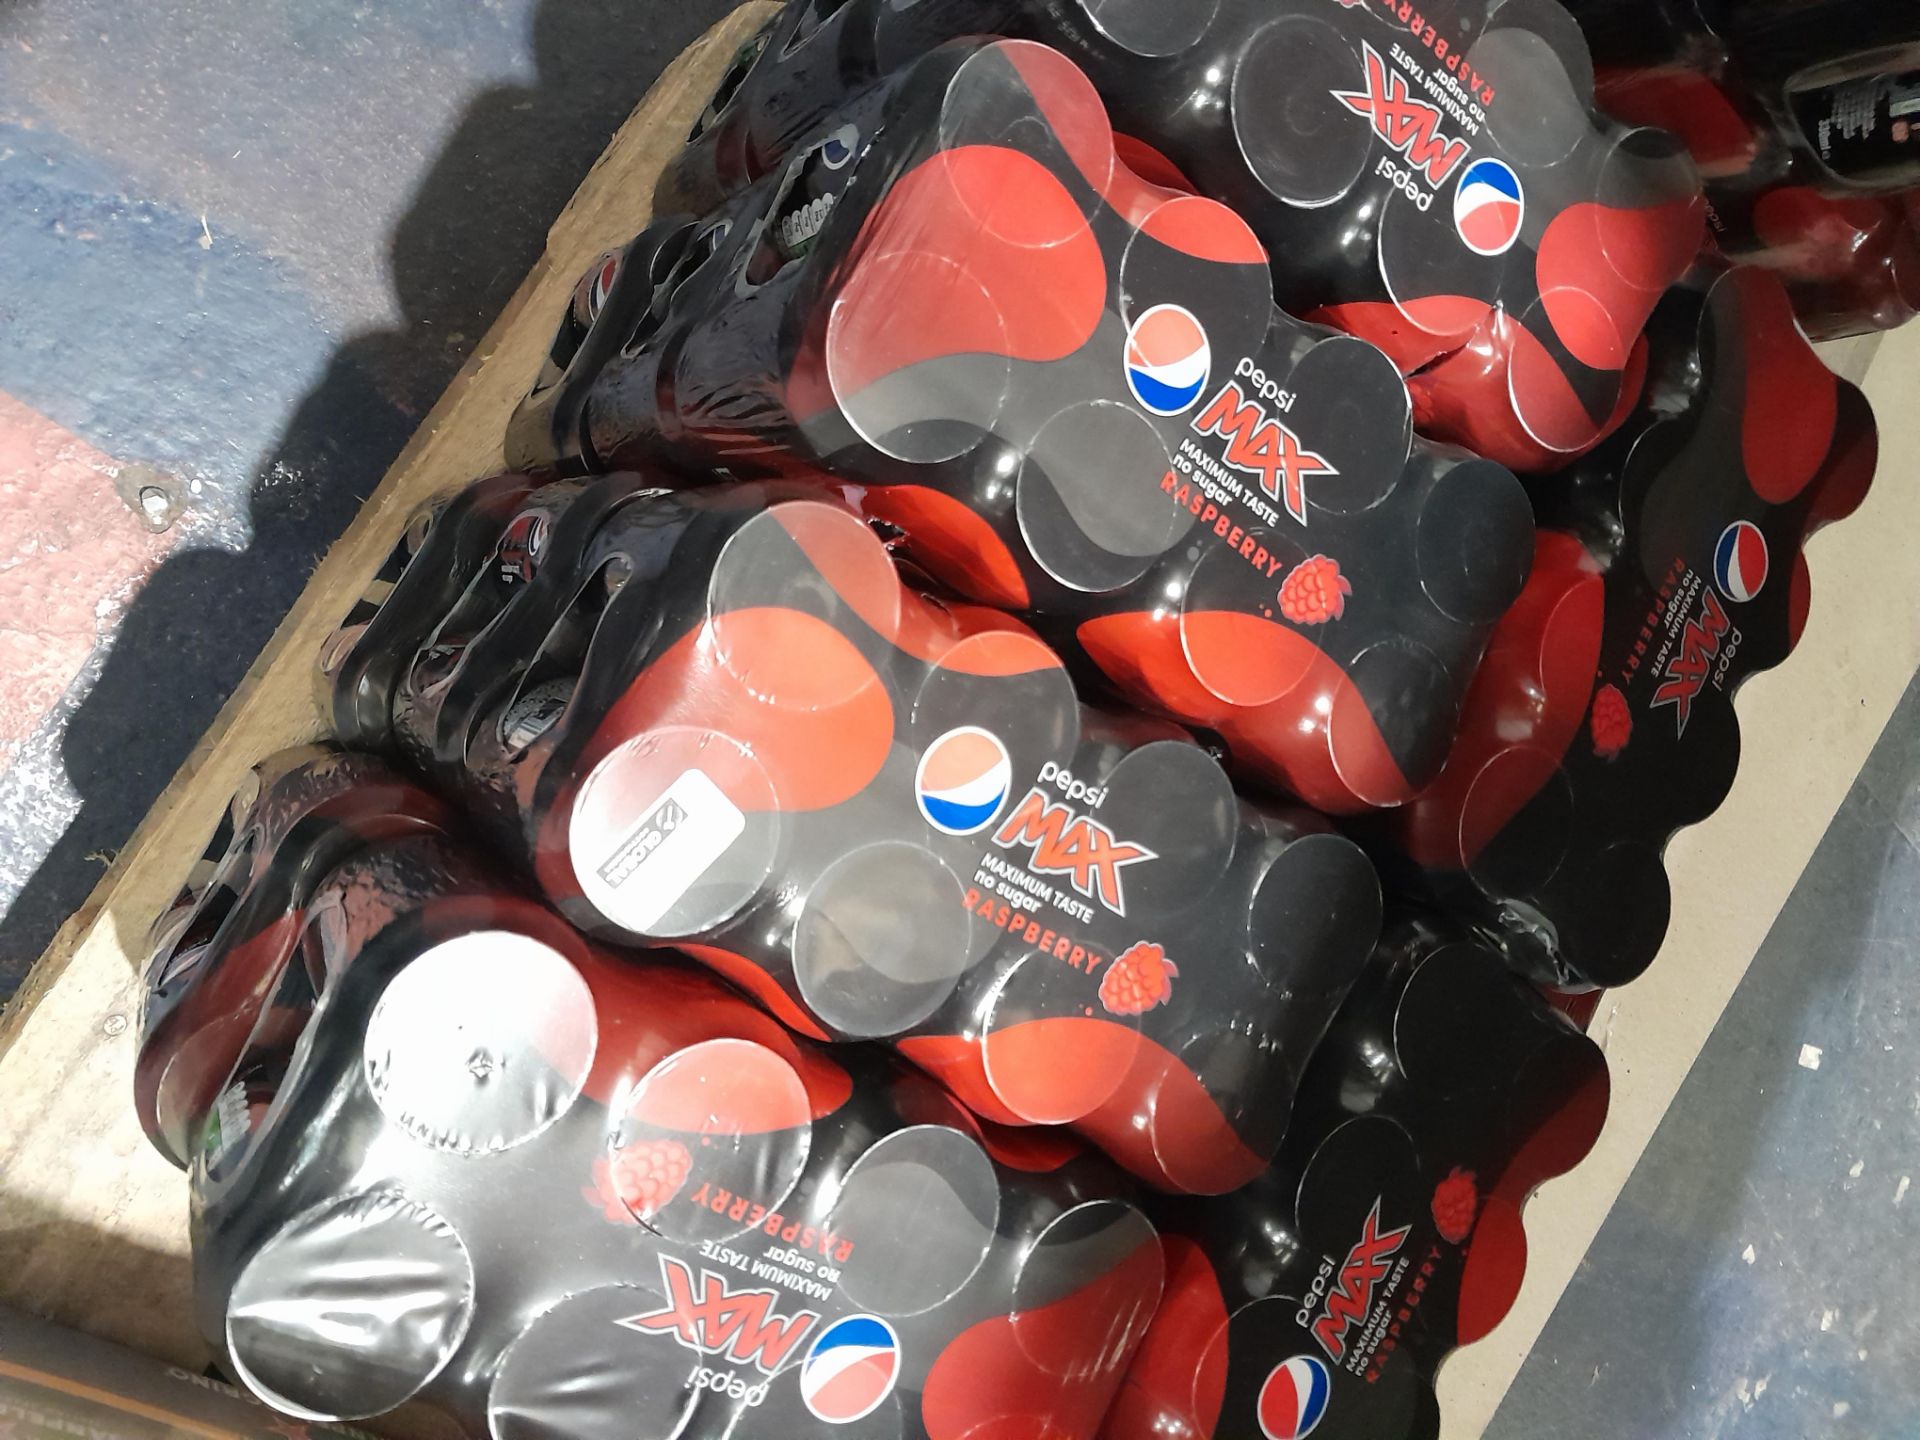 RRP £130 X22 Packs Of 6 Pepsi Max Raspberry Flavour Cans - BBE - Sep 23 - Image 2 of 2